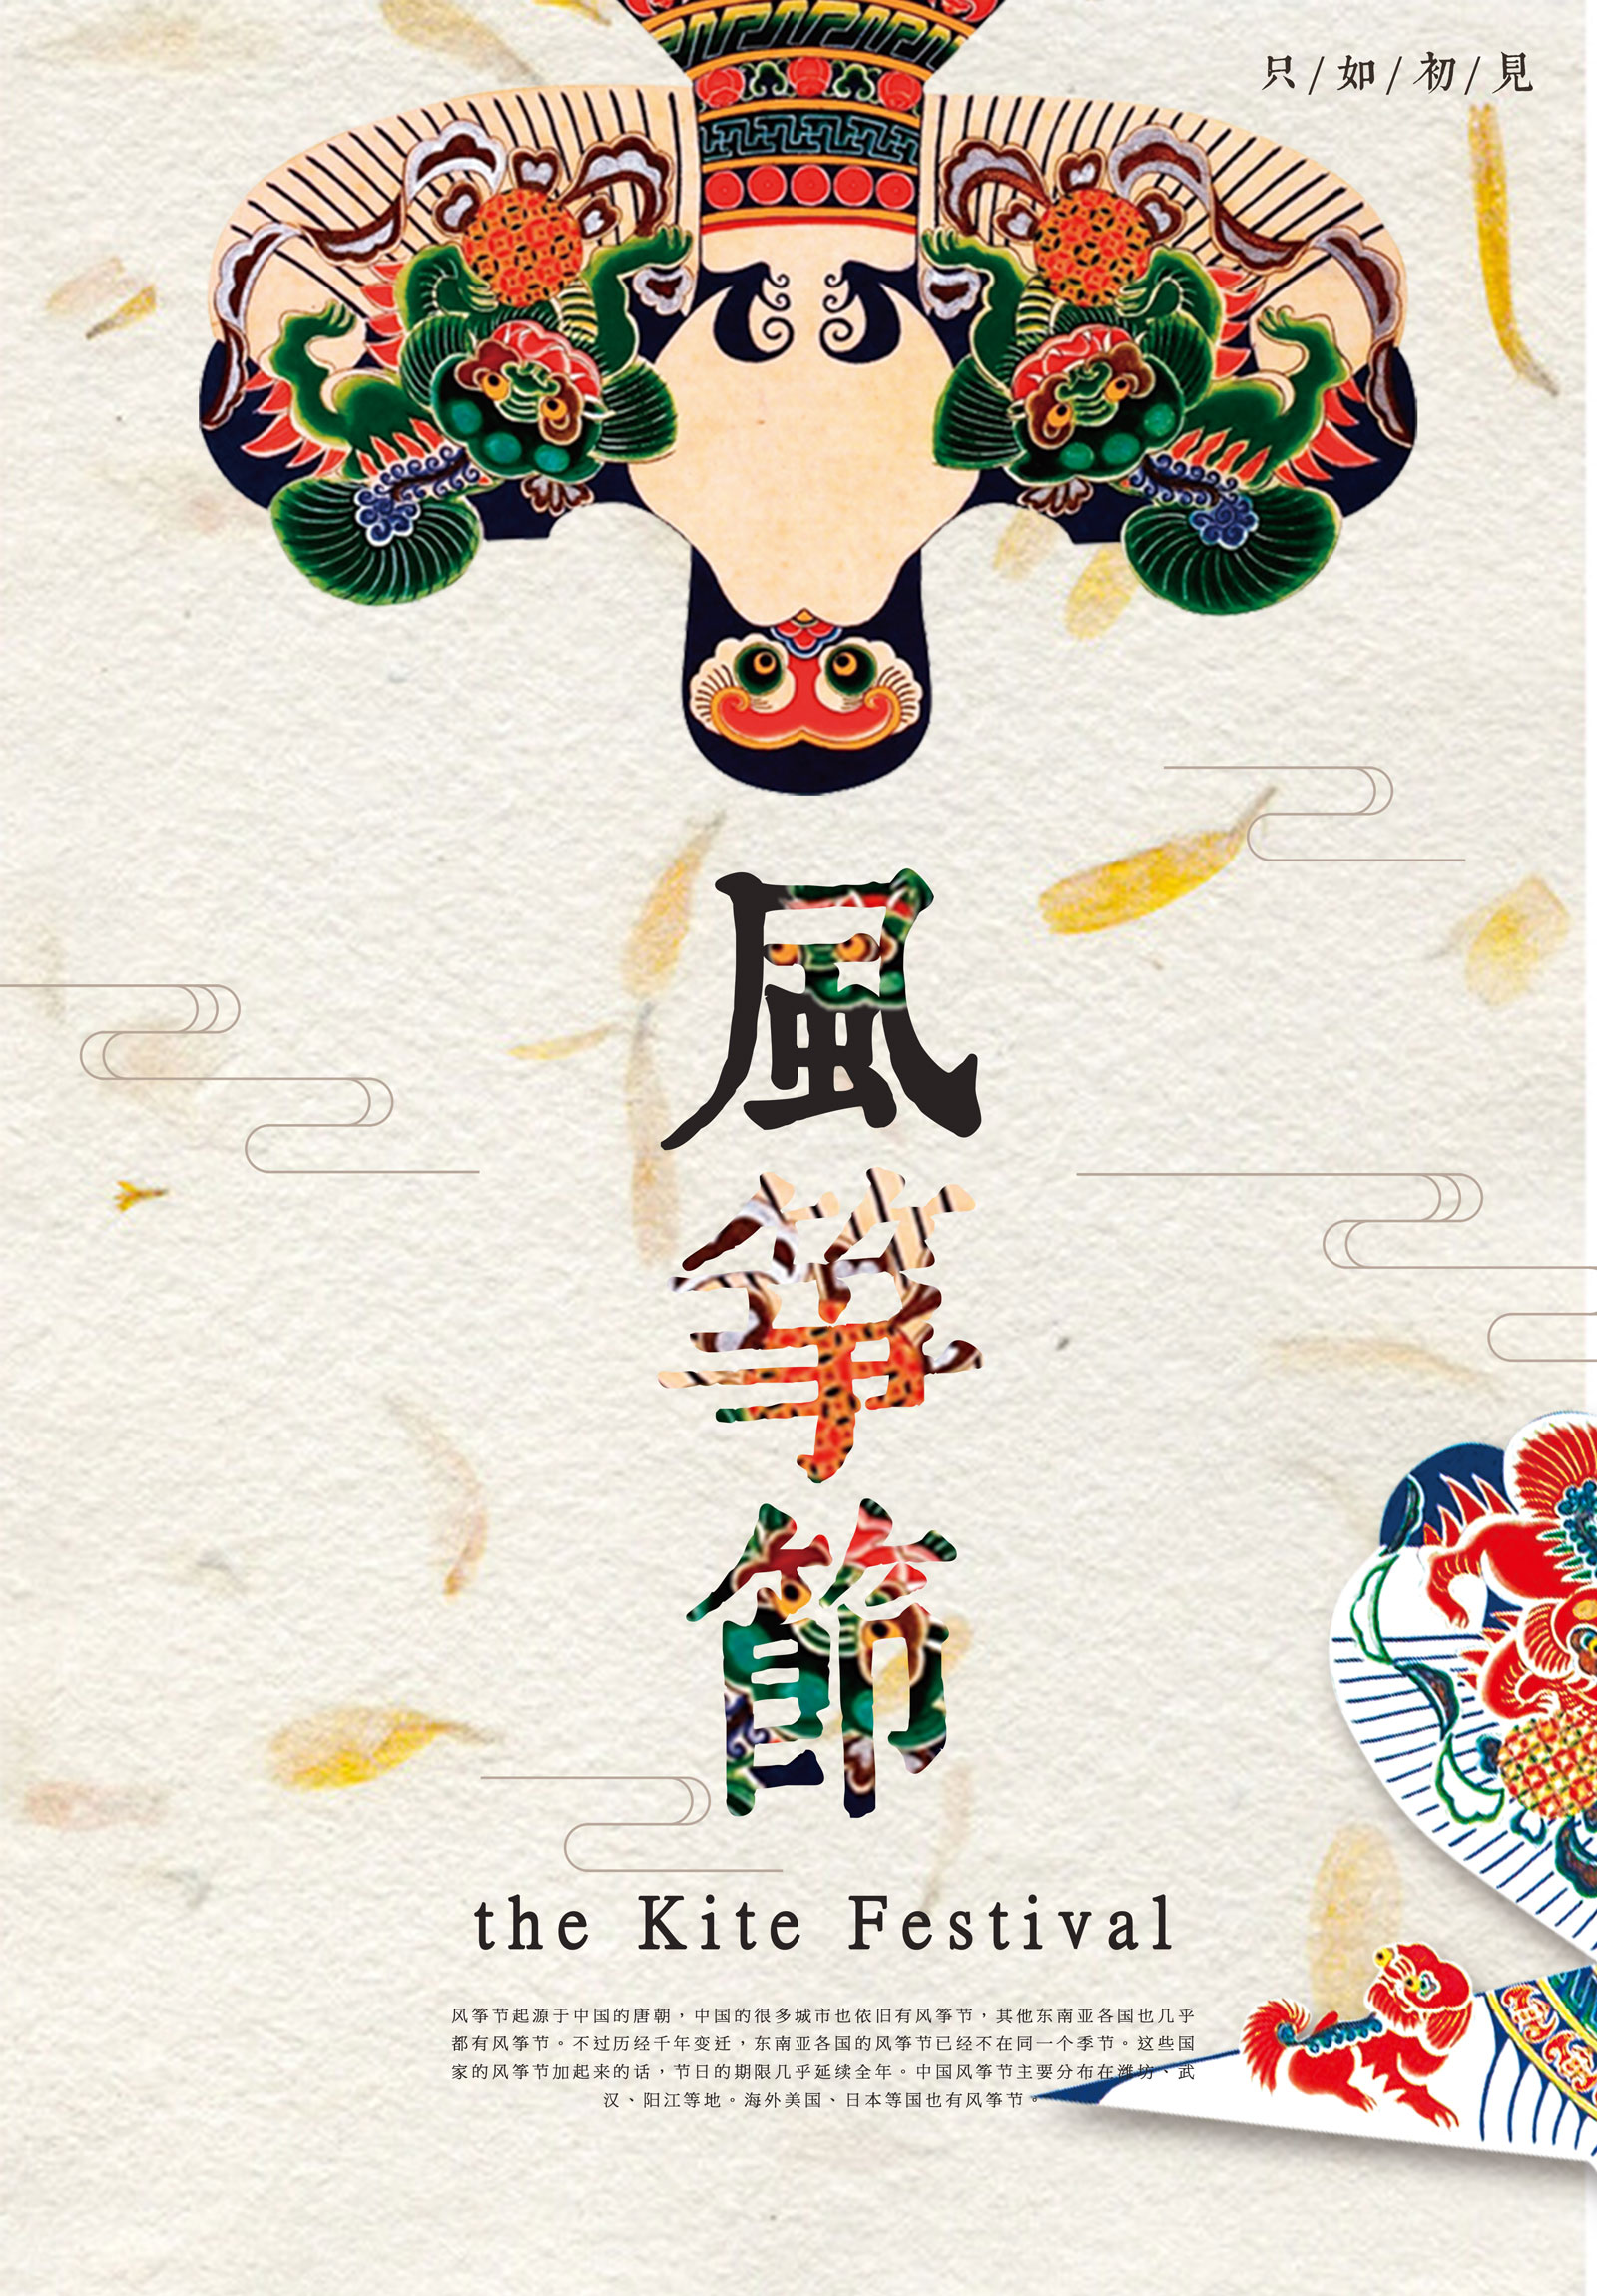 Chinese kite festival poster design - PSD File Free Download